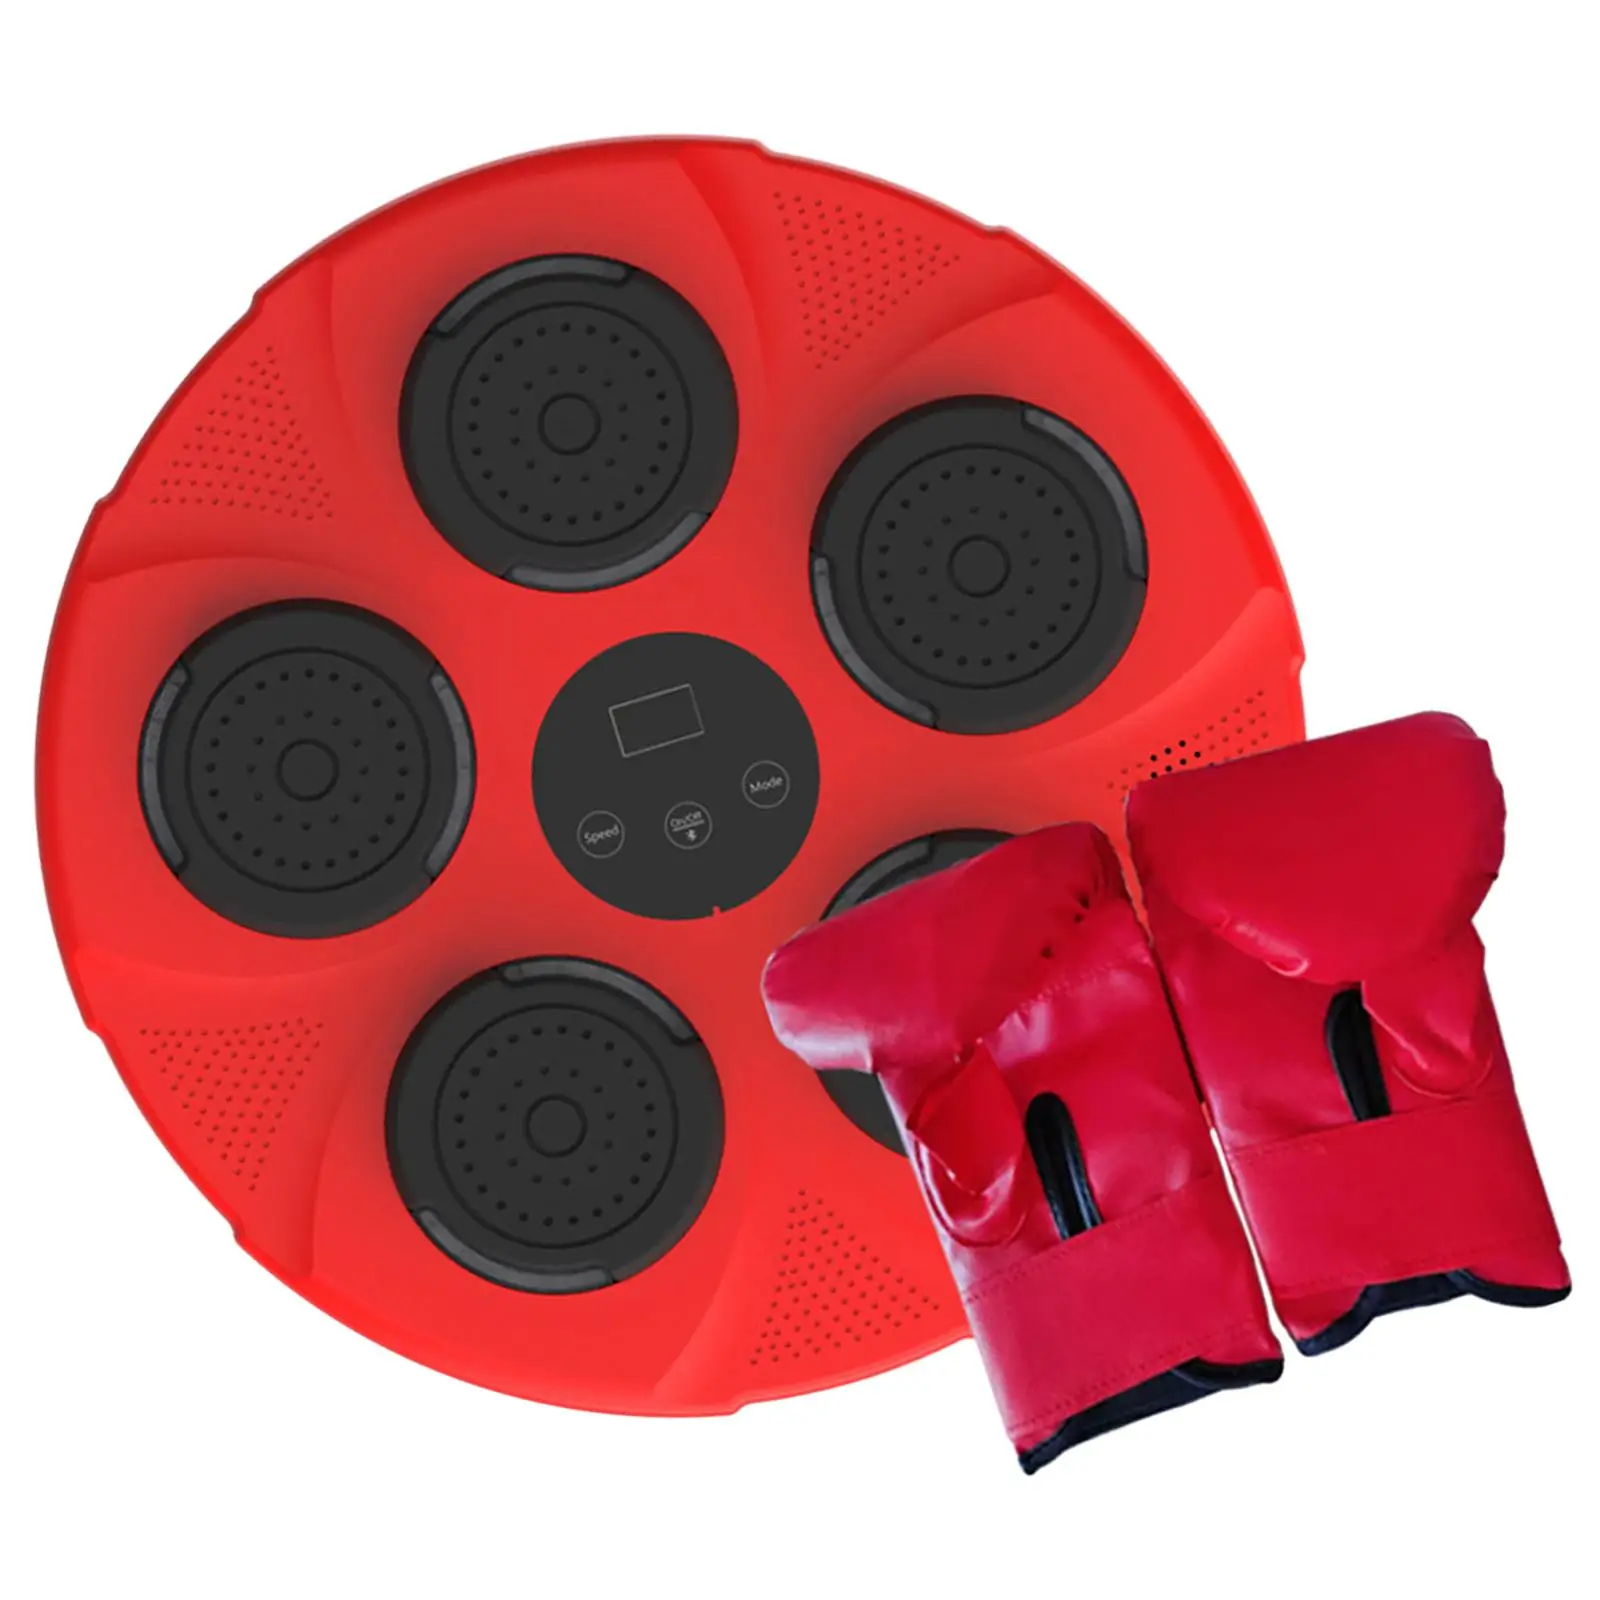 Boxing Machine Electronic Boxing Wall Target, Adults Wall Mounted Punching Pad Smart Boxing Trainer for Practice Home